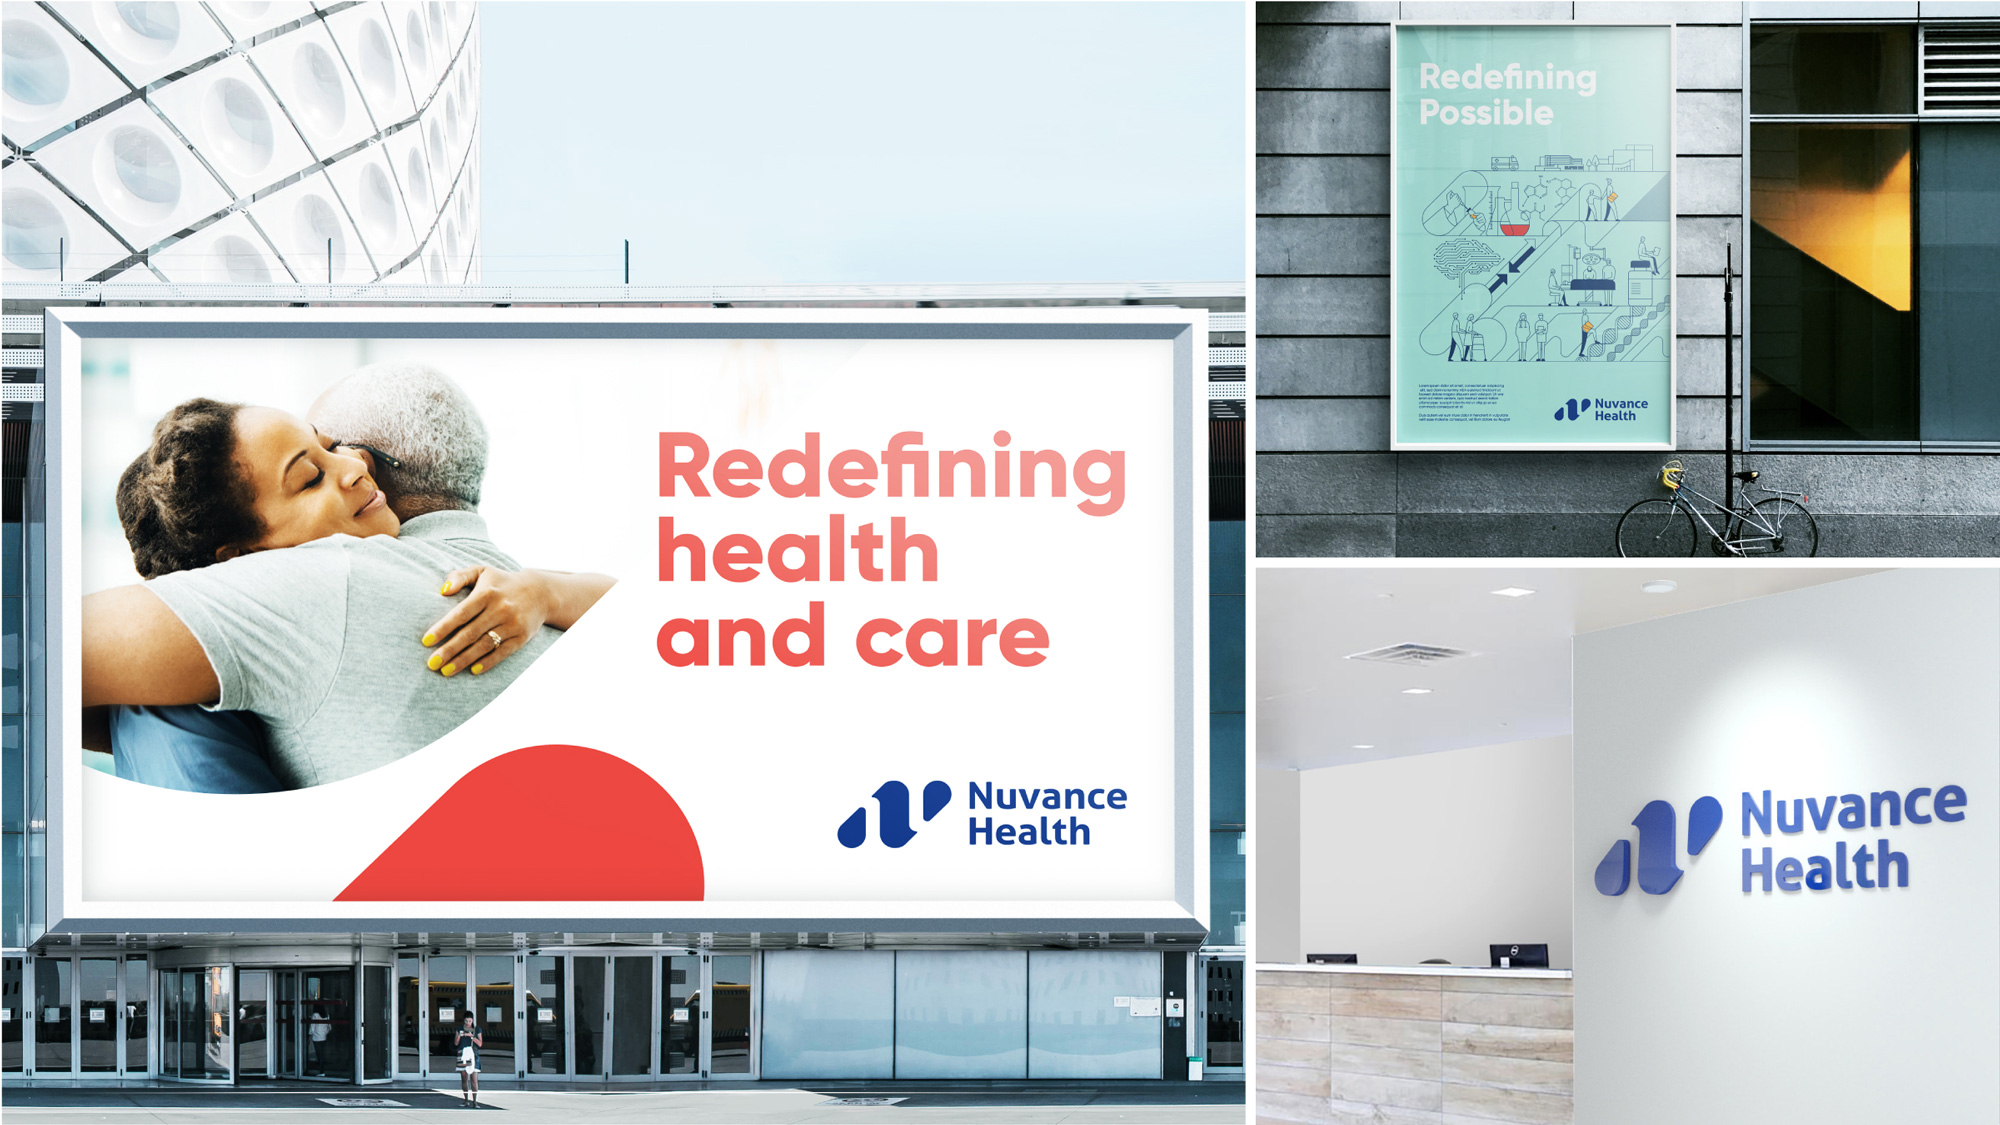 New Logo and Identity for Nuvance Health by Monigle